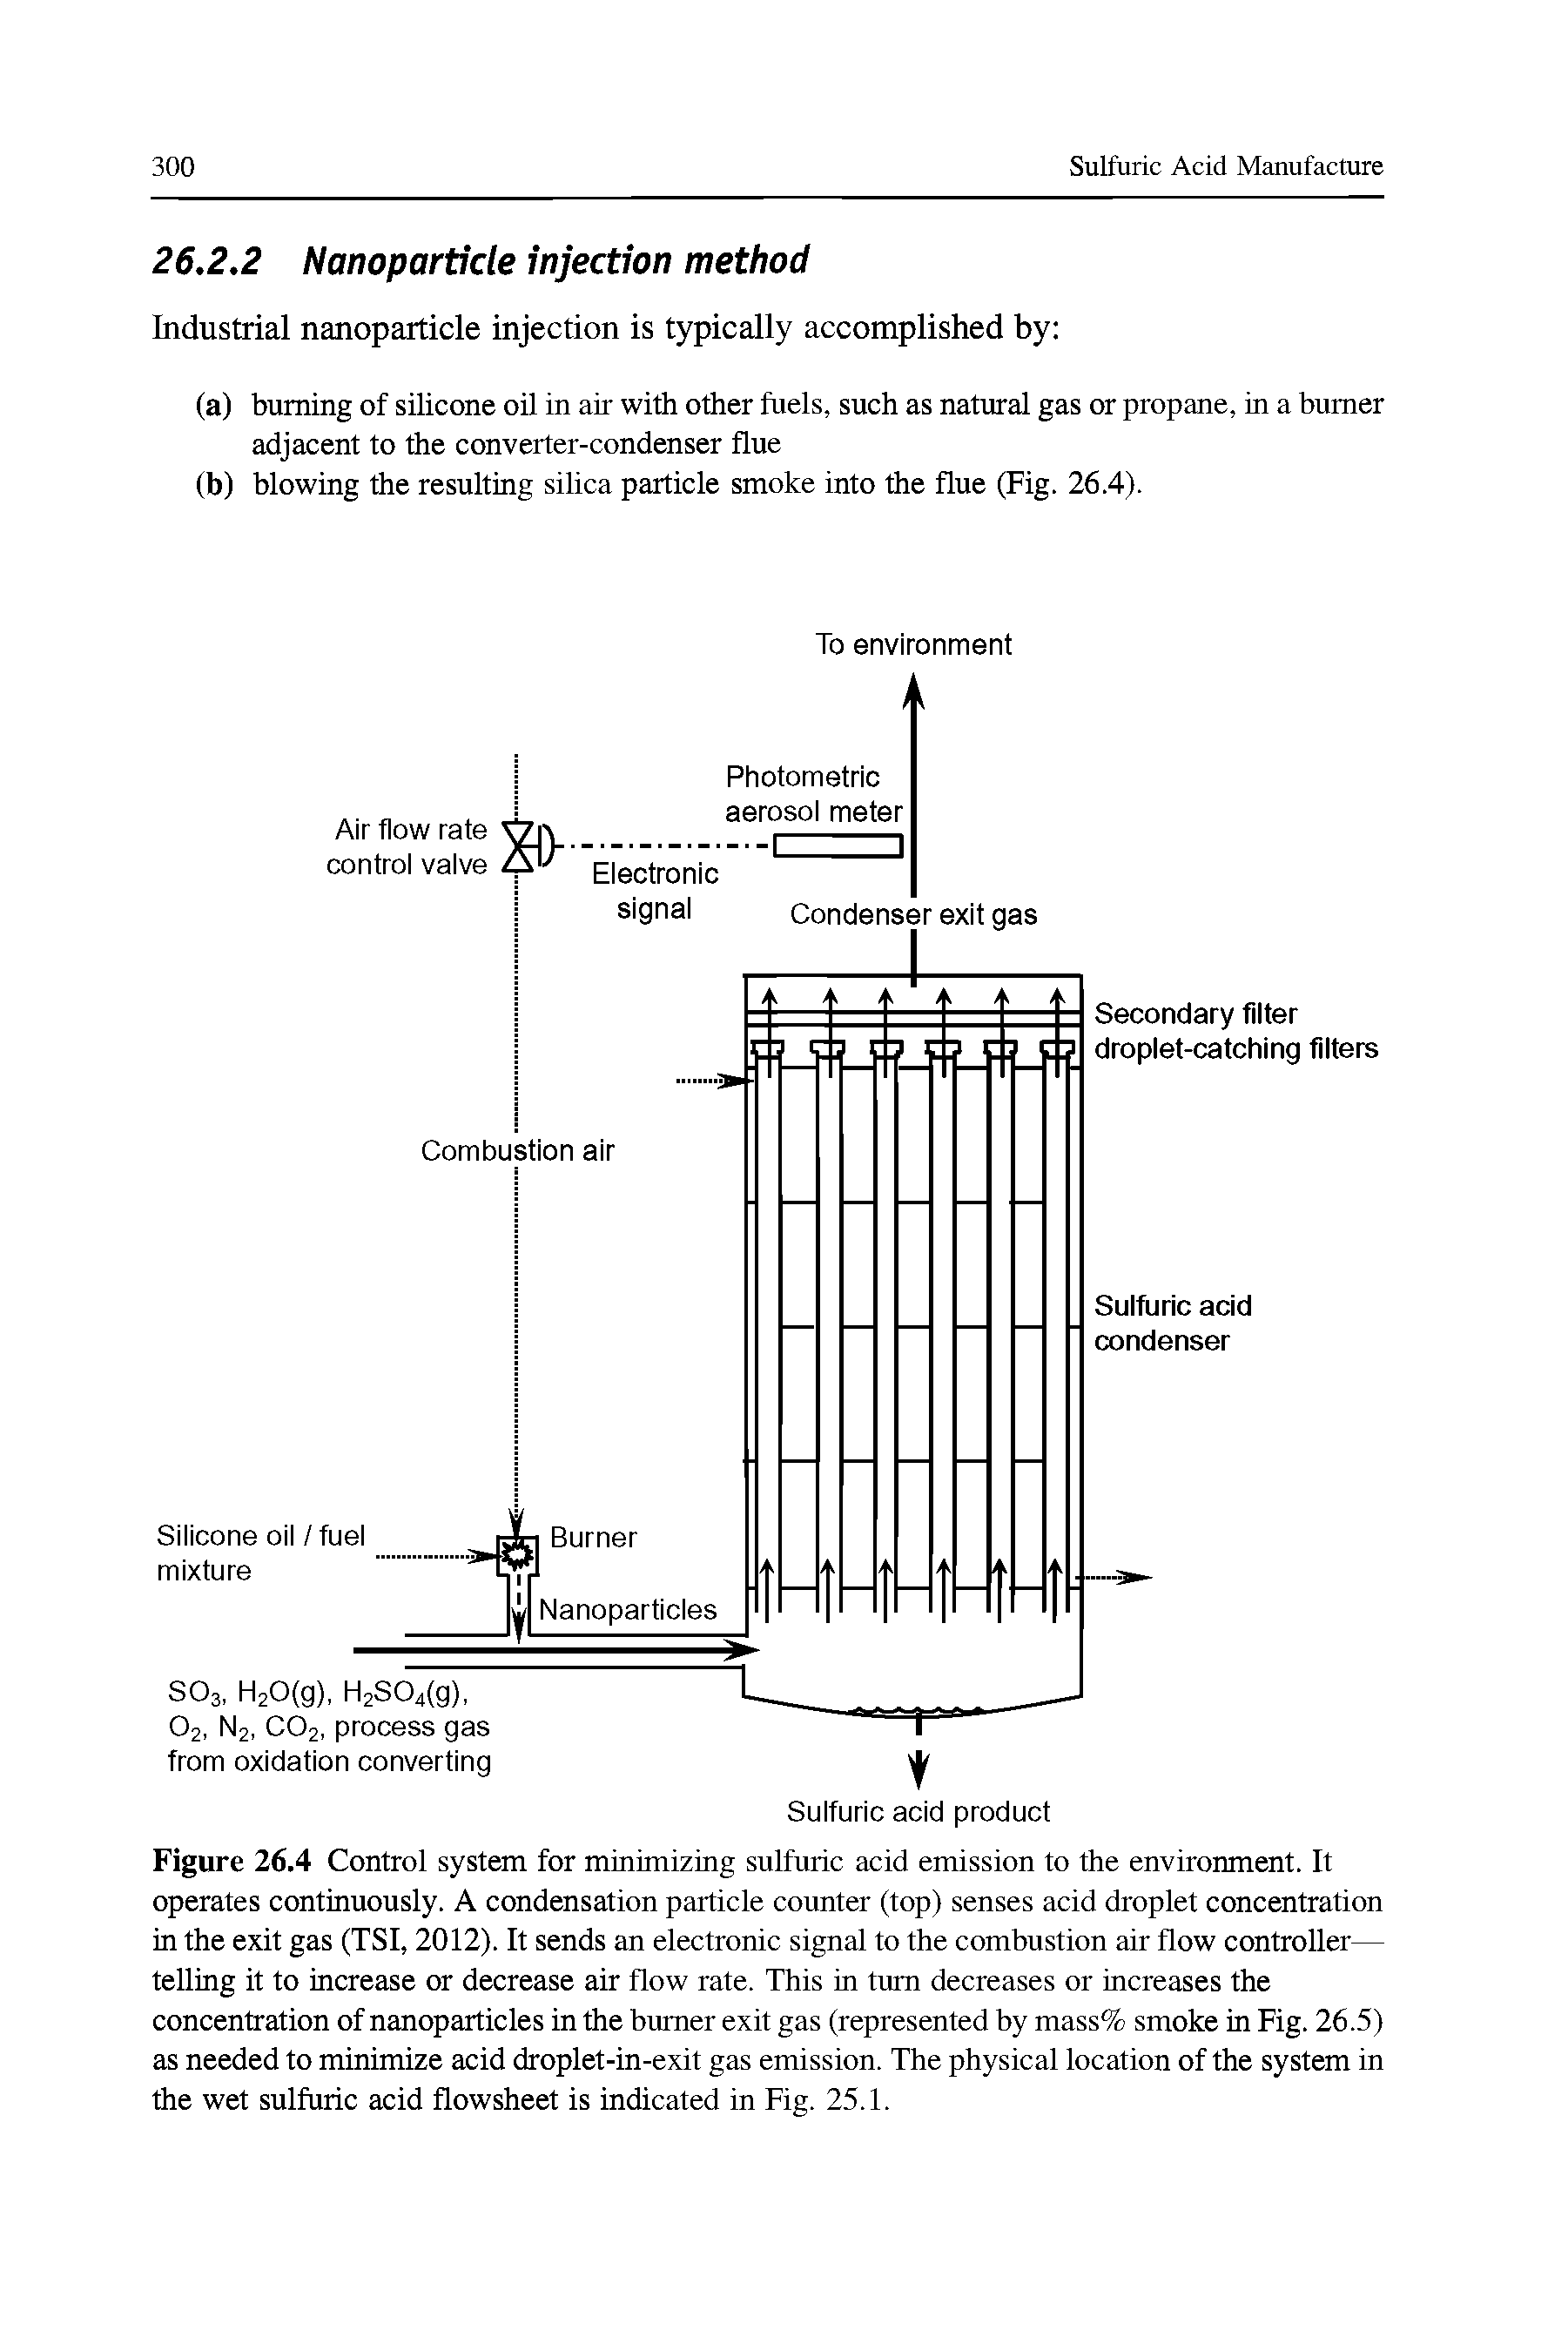 Figure 26.4 Control system for minimizing sulfuric acid emission to the environment. It operates continuously. A condensation particle counter (top) senses acid droplet concentration in the exit gas (TSI, 2012). It sends an electronic signal to the combustion air flow controller— telling it to increase or decrease air flow rate. This in turn decreases or increases the concentration of nanoparticles in the burner exit gas (represented by mass% smoke in Fig. 26.5) as needed to niinirriize acid droplet-in-exit gas emission. The physical location of the system in the wet sulfuric acid flowsheet is indicated in Fig. 25.1.